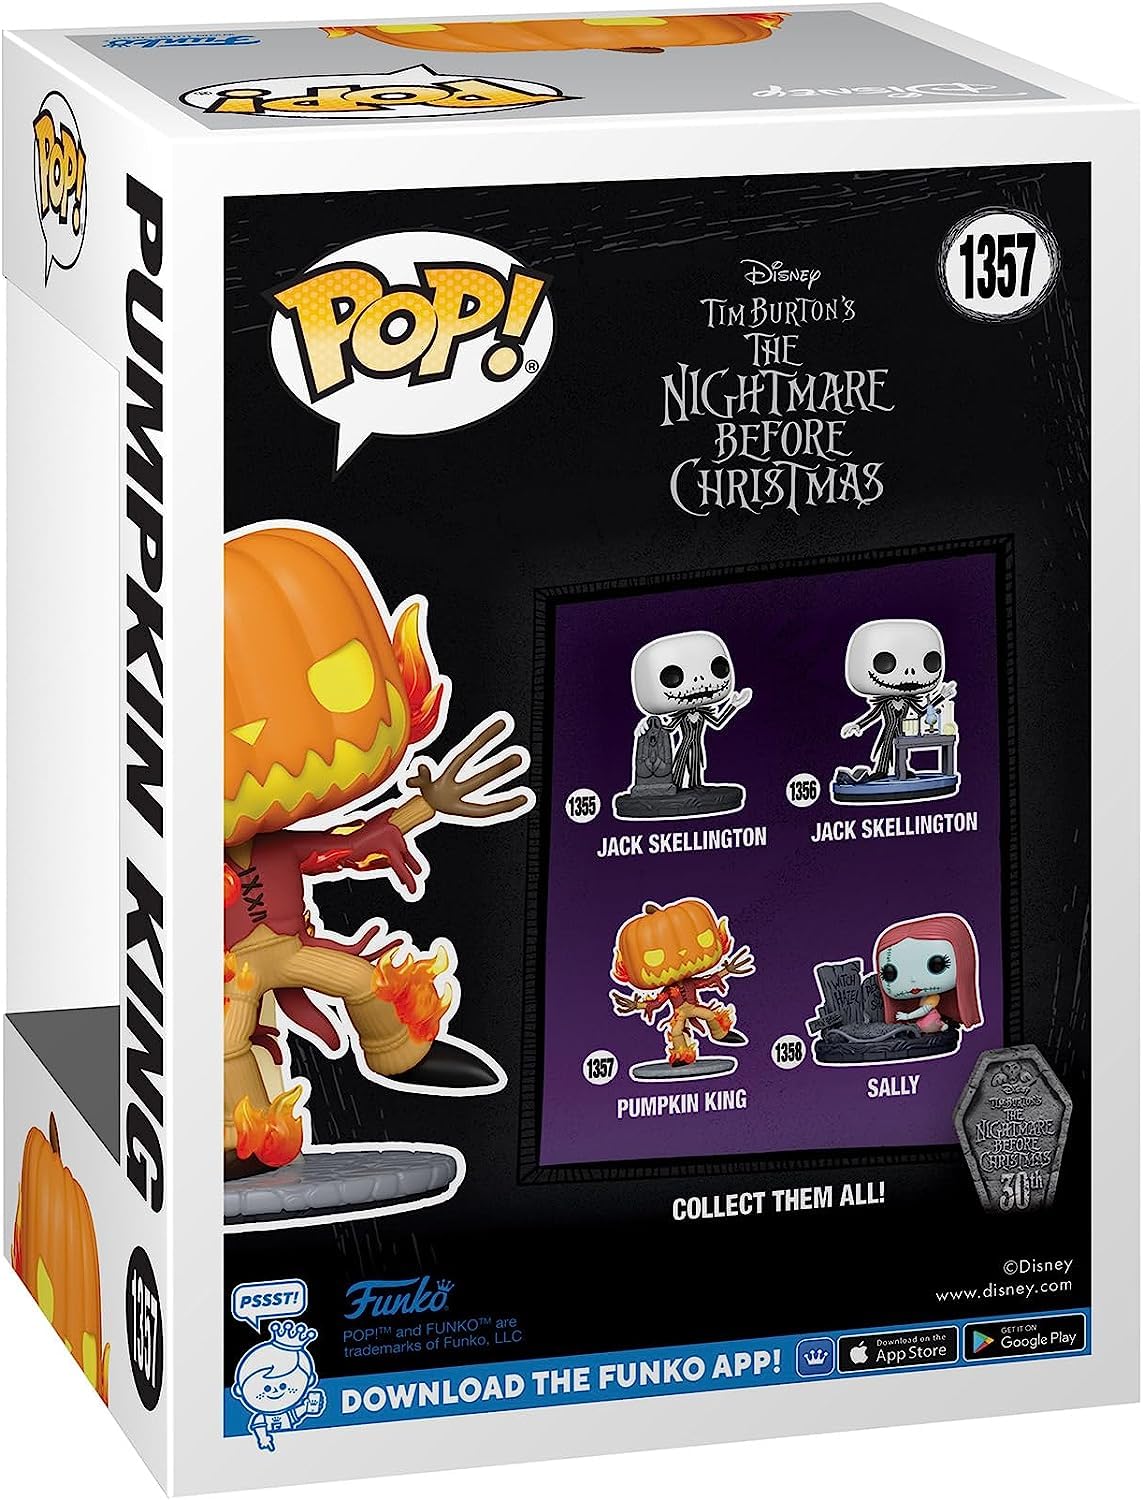 POP Disney: The Nightmare Before Christmas 30th Anniversary - Pumpkin King Funko Vinyl Figure (Bundled with Compatible Box Protector Case) Multicolored 3.75 inches